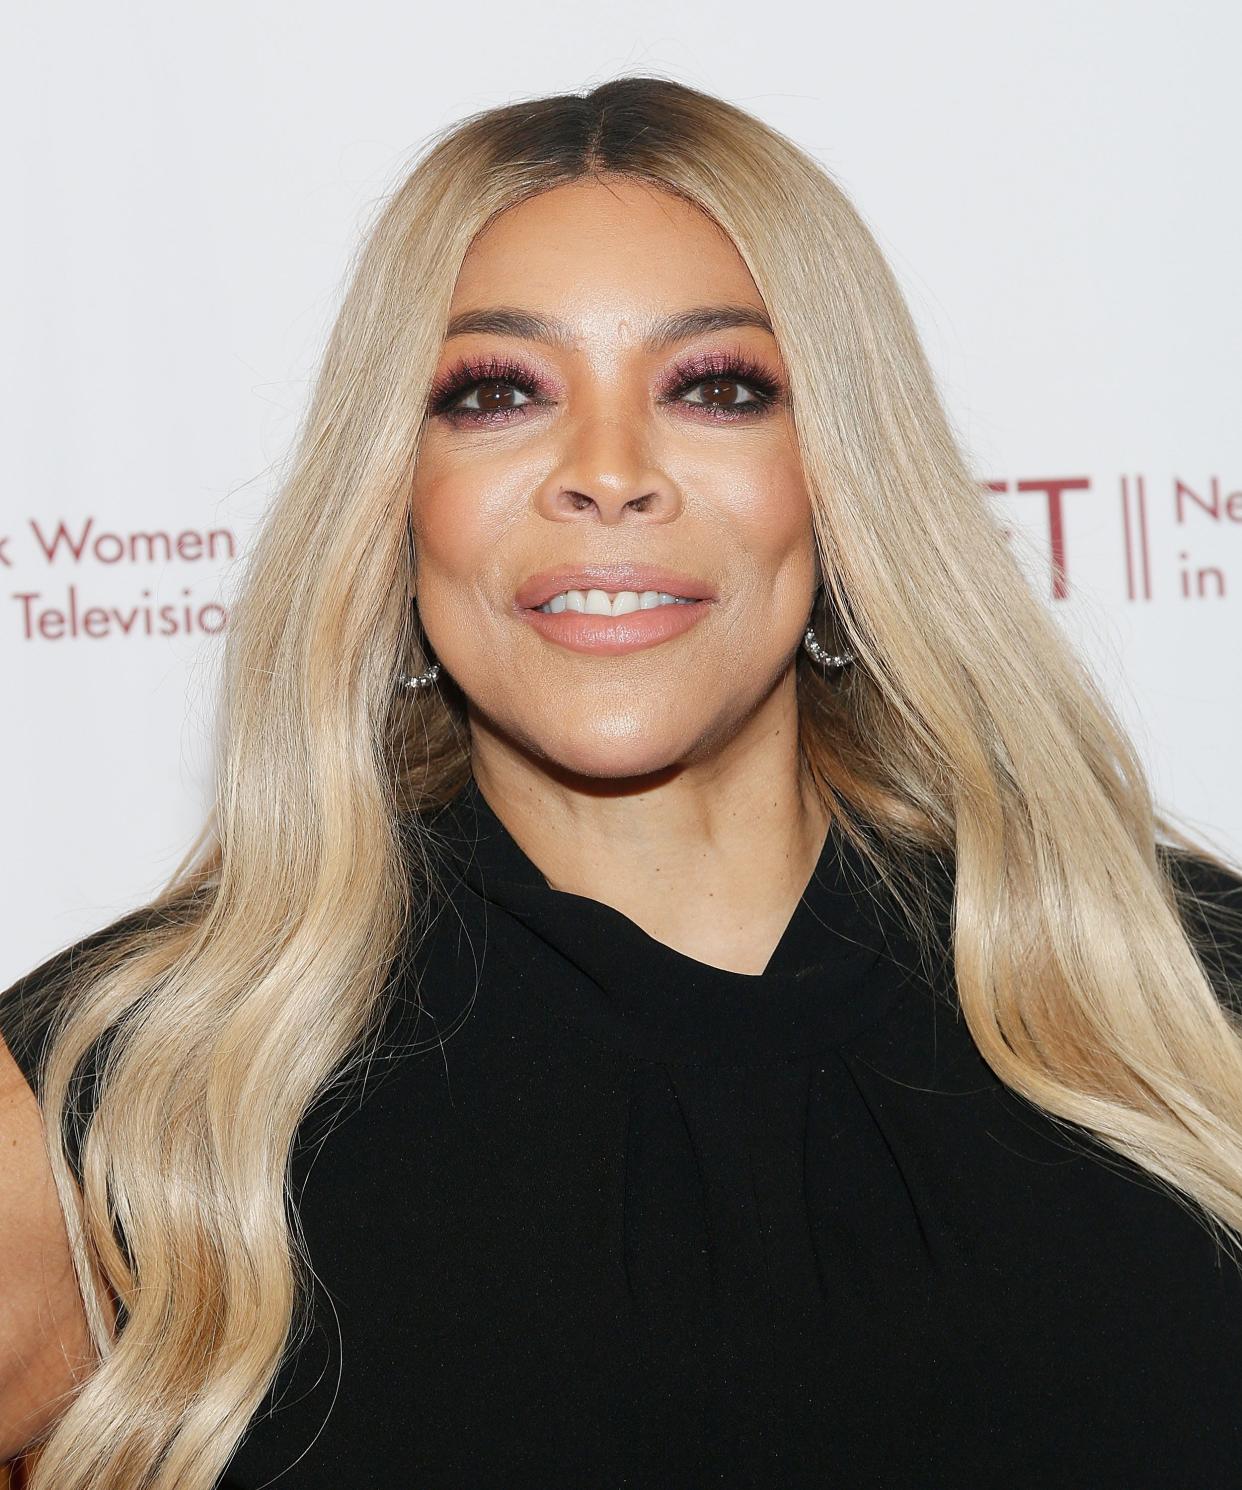 Daytime talk show host Wendy Williams, pictured here in 2019, has been diagnosed with frontotemporal dementia and aphasia, the same diagnosis as actor Bruce Willis.